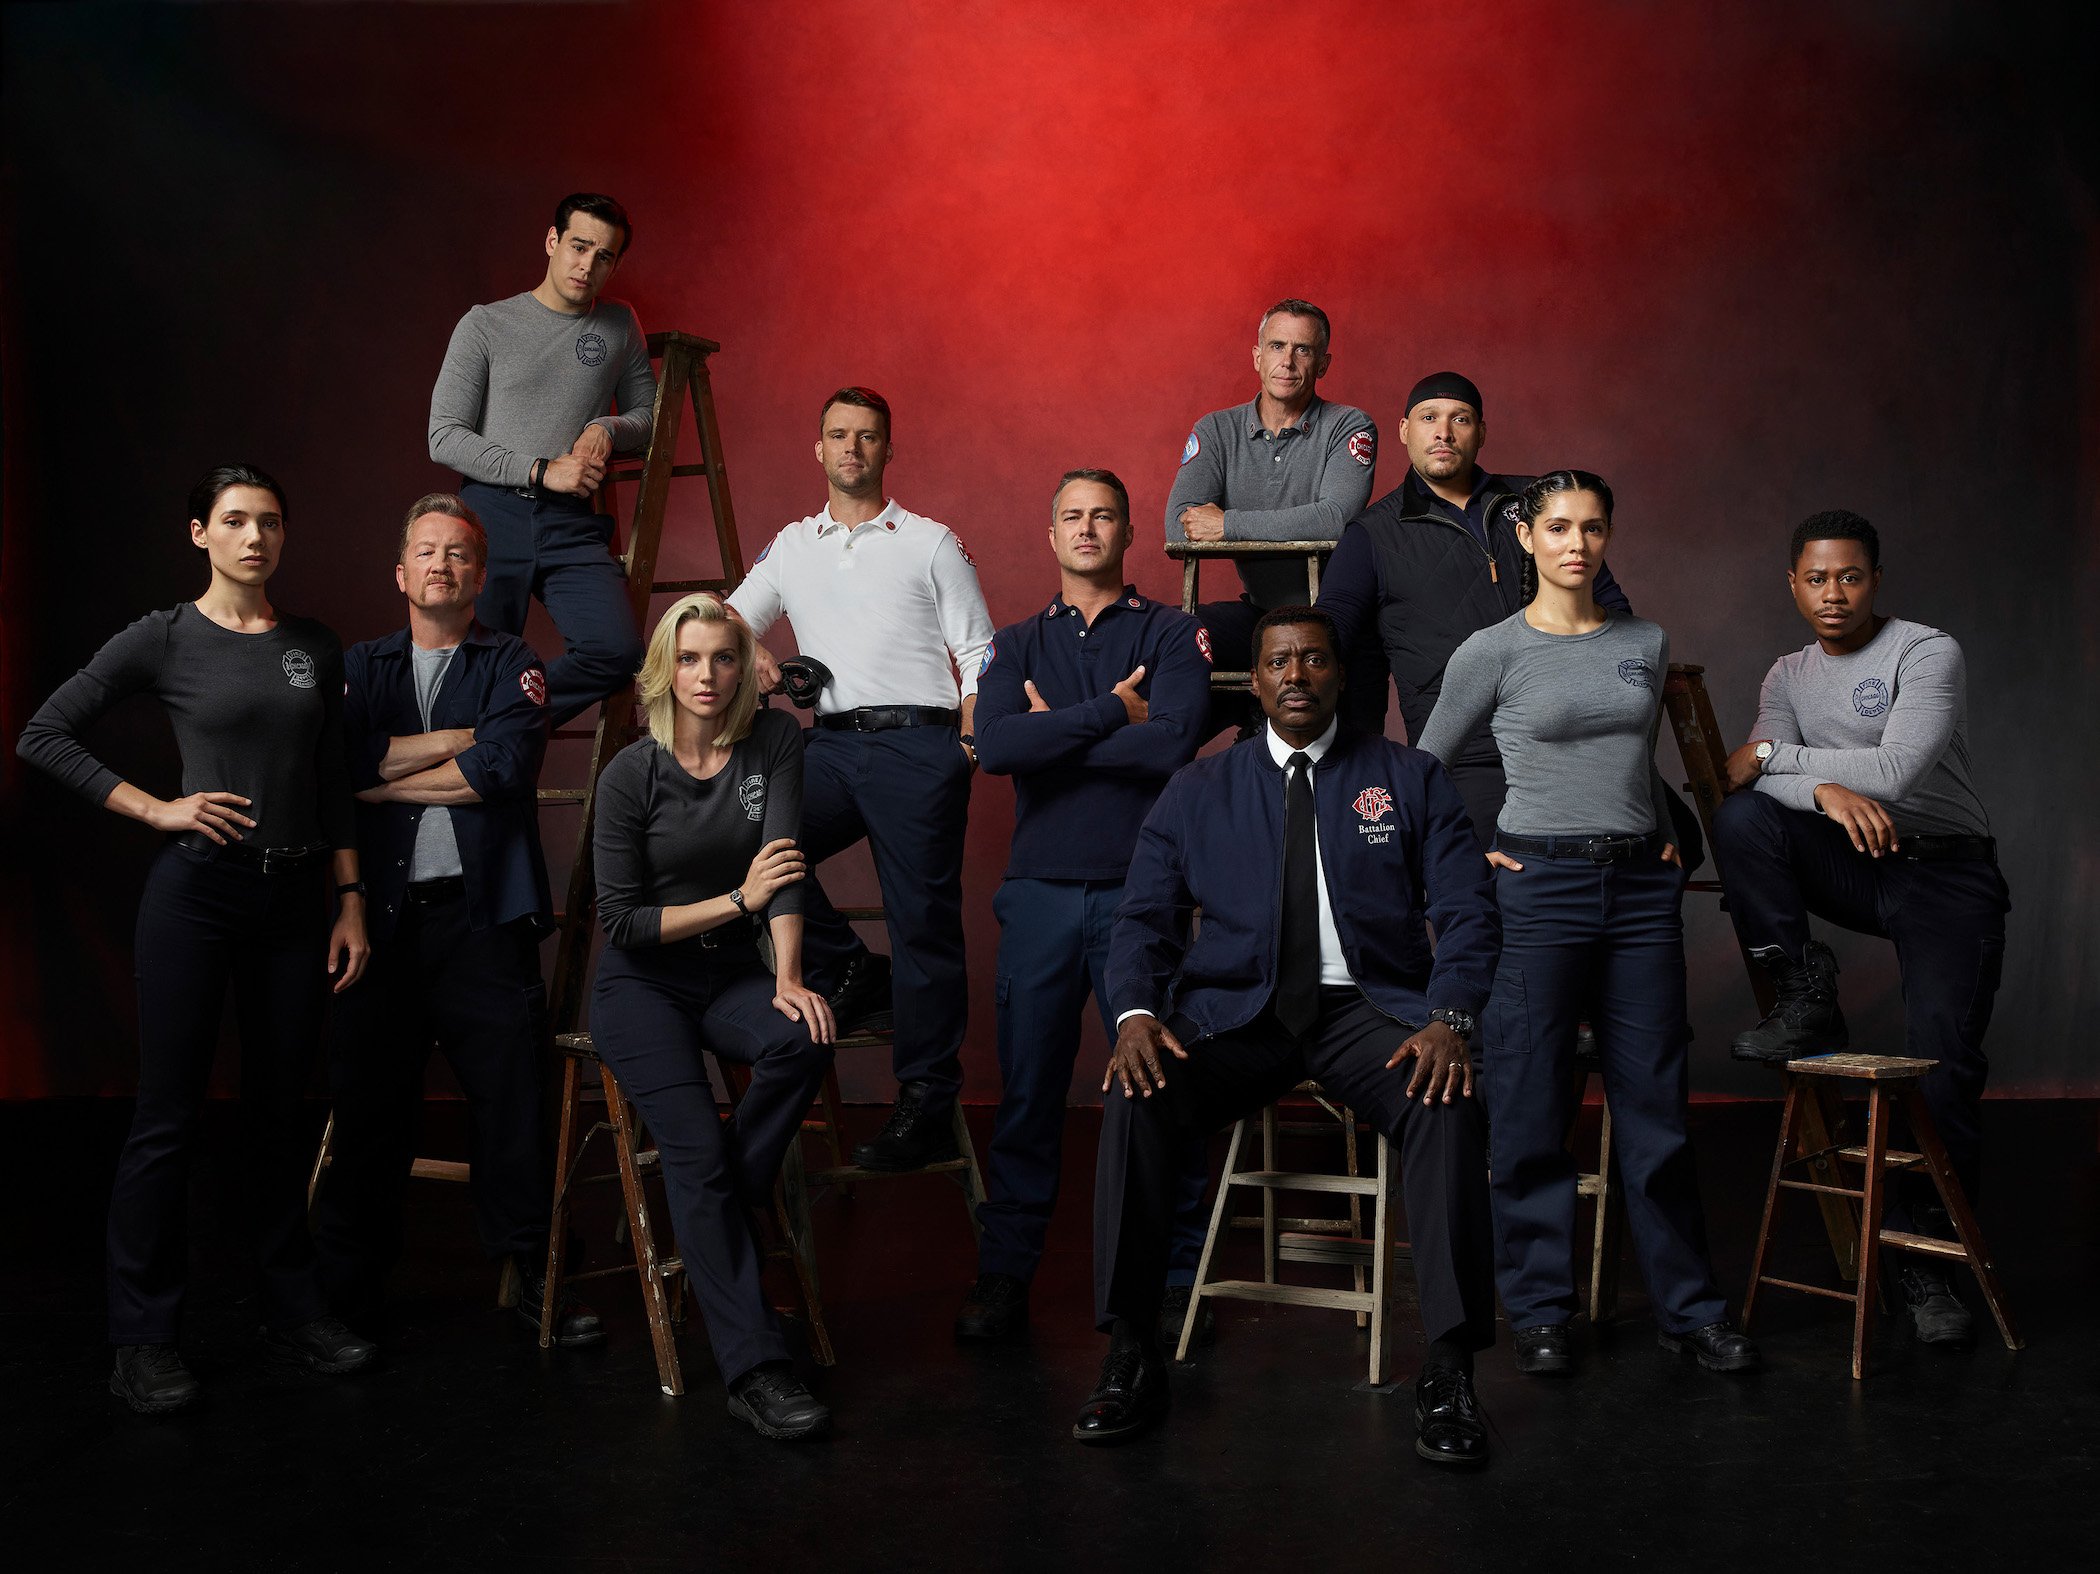 'Chicago Fire' Season 10 cast standing together against a red background